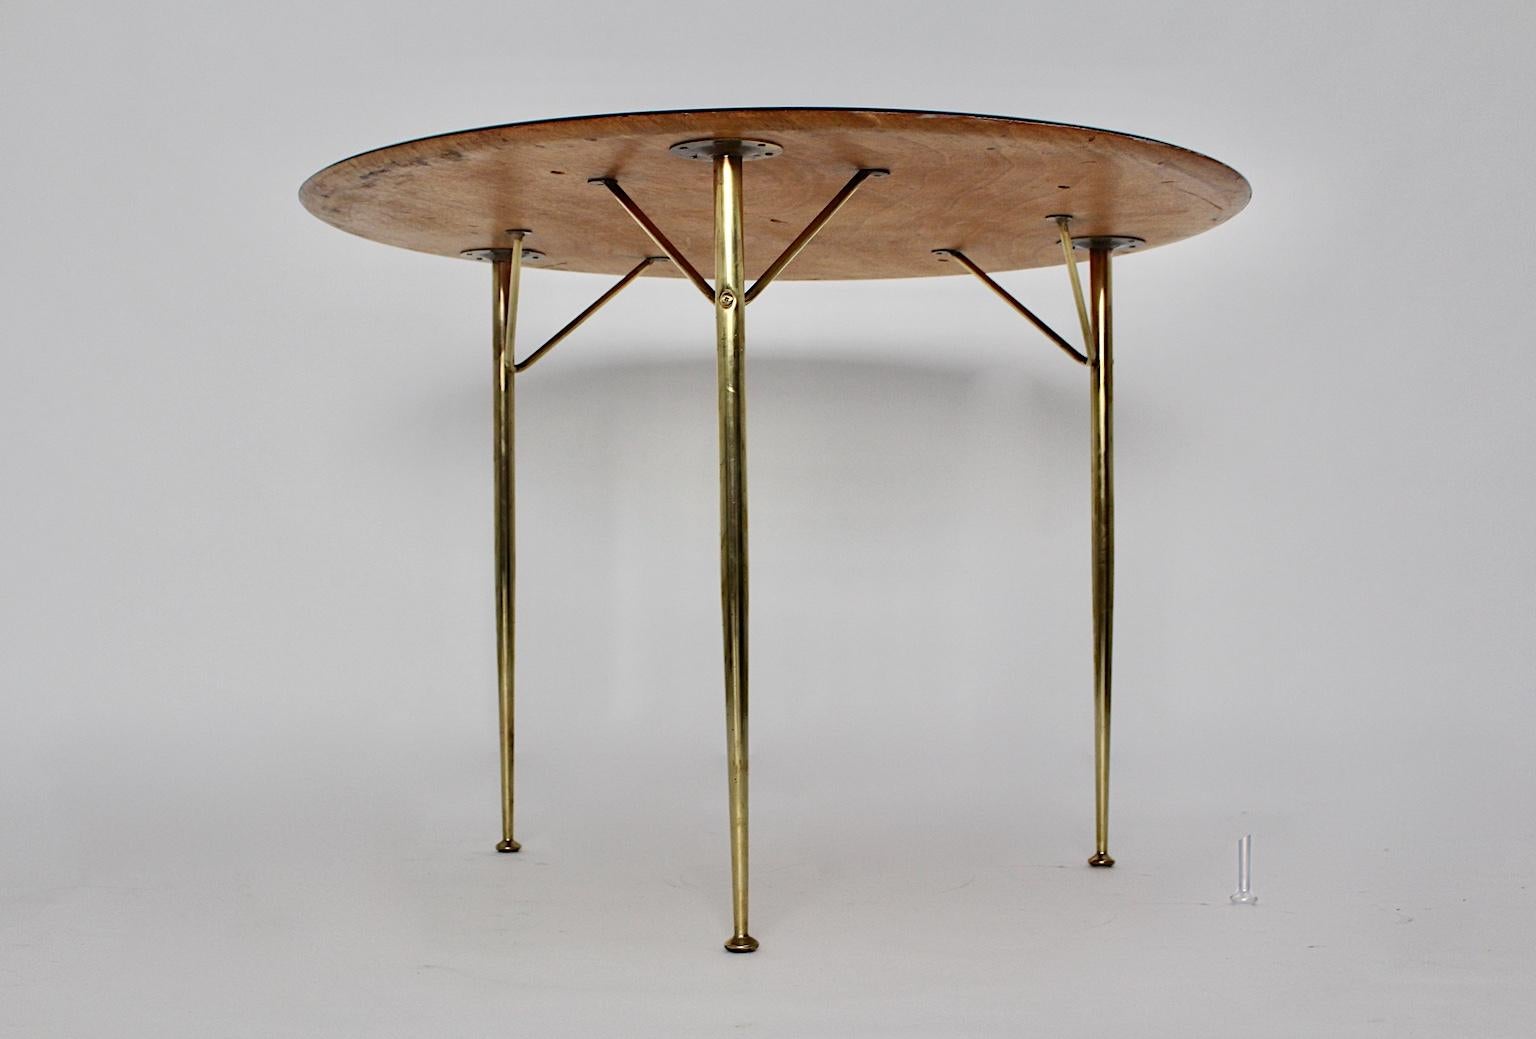 Scandinavian modern vintage dining table or center table by Arne Jacobsen for Fritz Hansen, which was created and manufactured in Denmark 1950s.
The dining table shows a brass base with three legs and a newly black lacquered top in glossy finish.